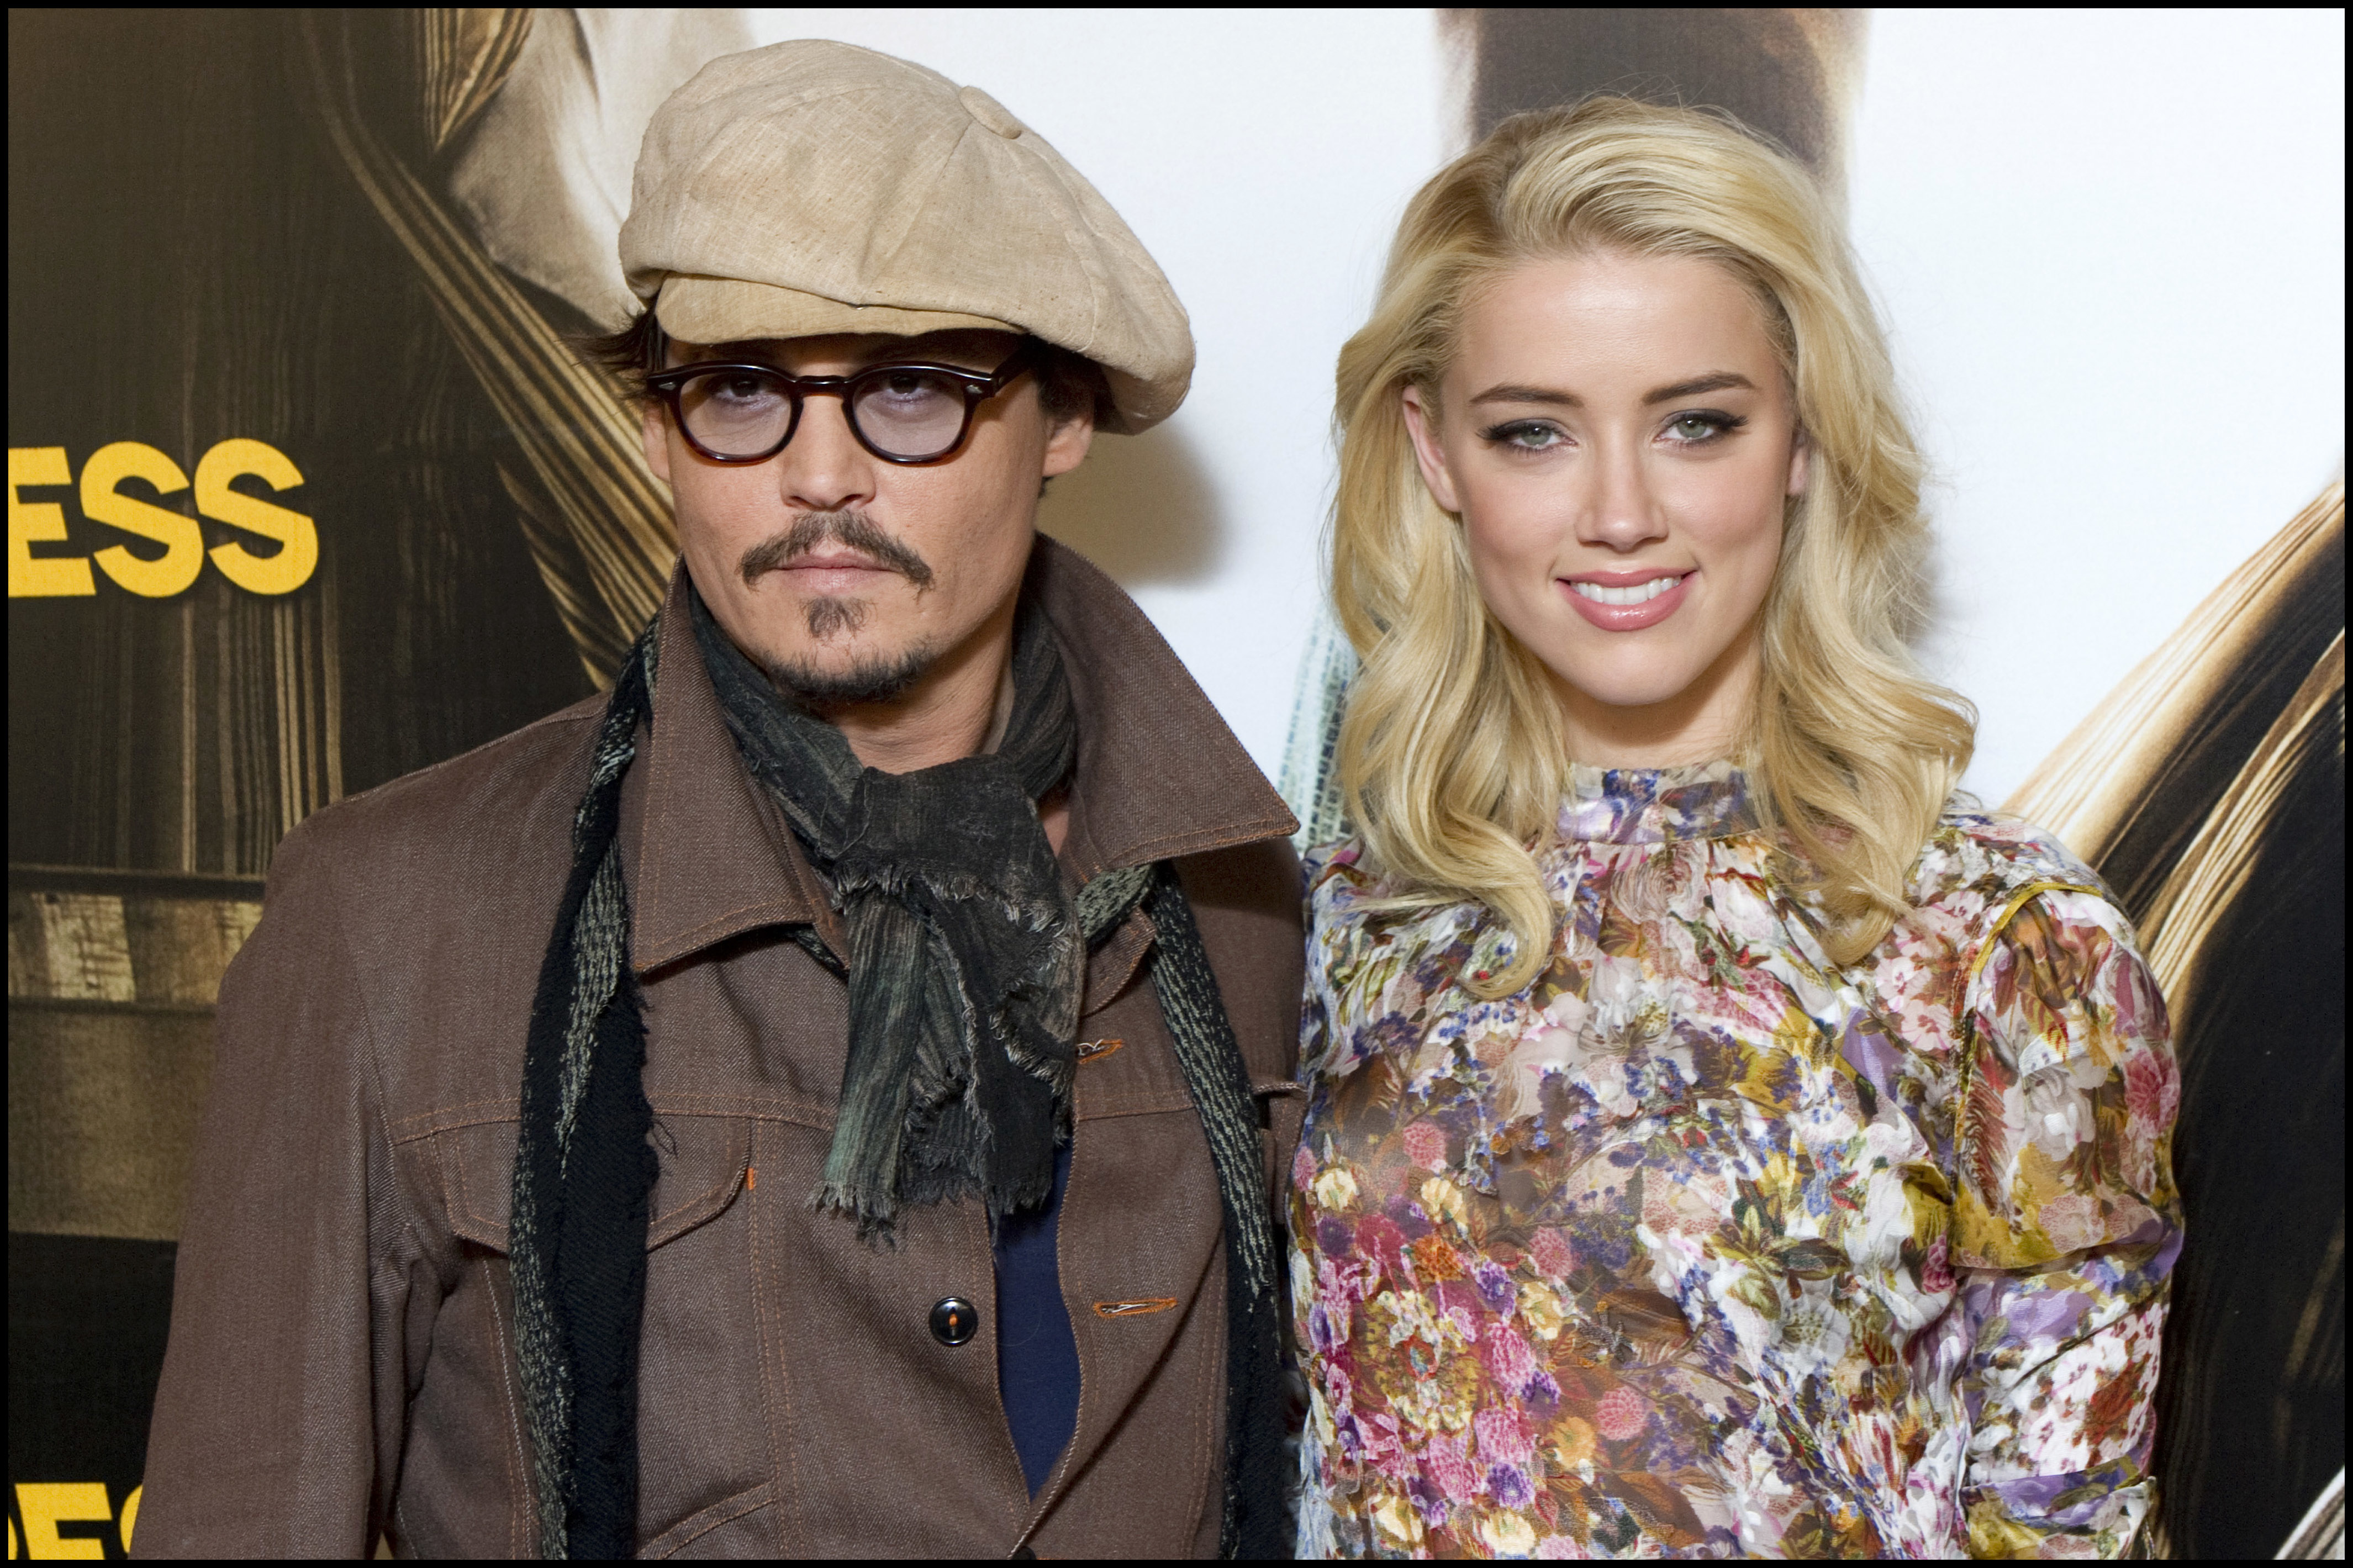 Johnny Depp and Amber Heard attend the "Rum Express" (Rum Diary) photocall on November 8, 2011 in Paris. | Source: Getty Images